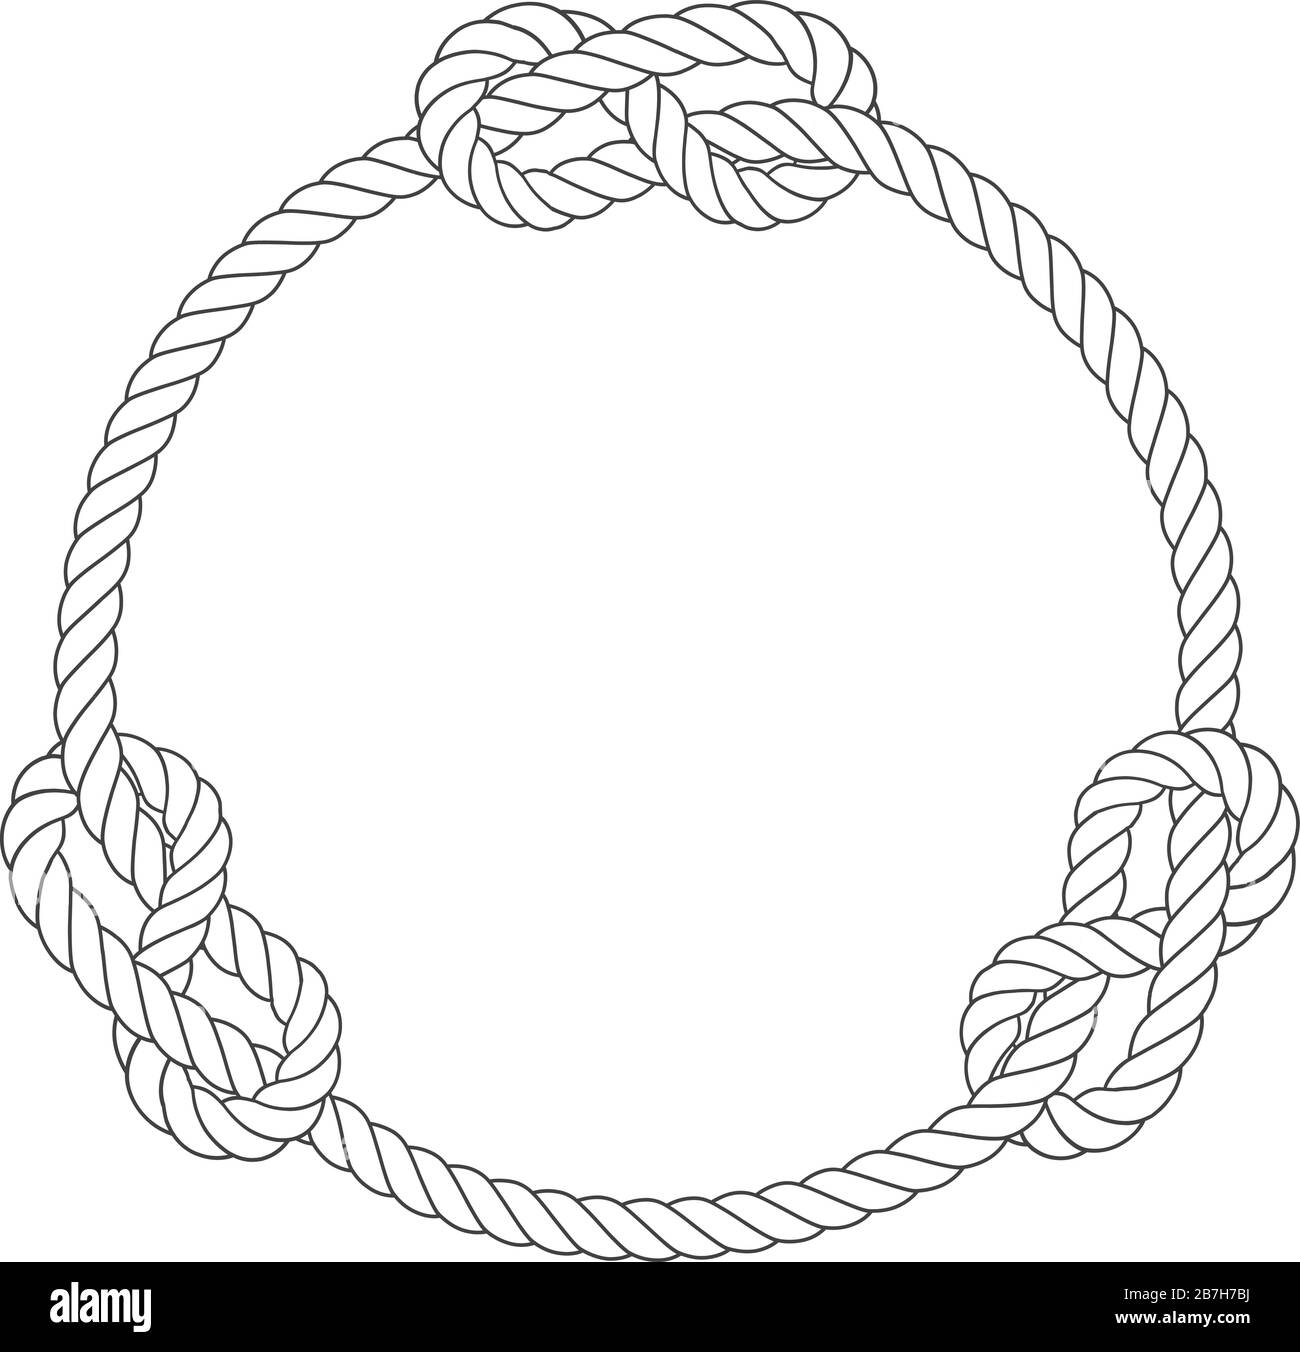 Round rope frame with knots, simple style line rope, marine border Stock Vector